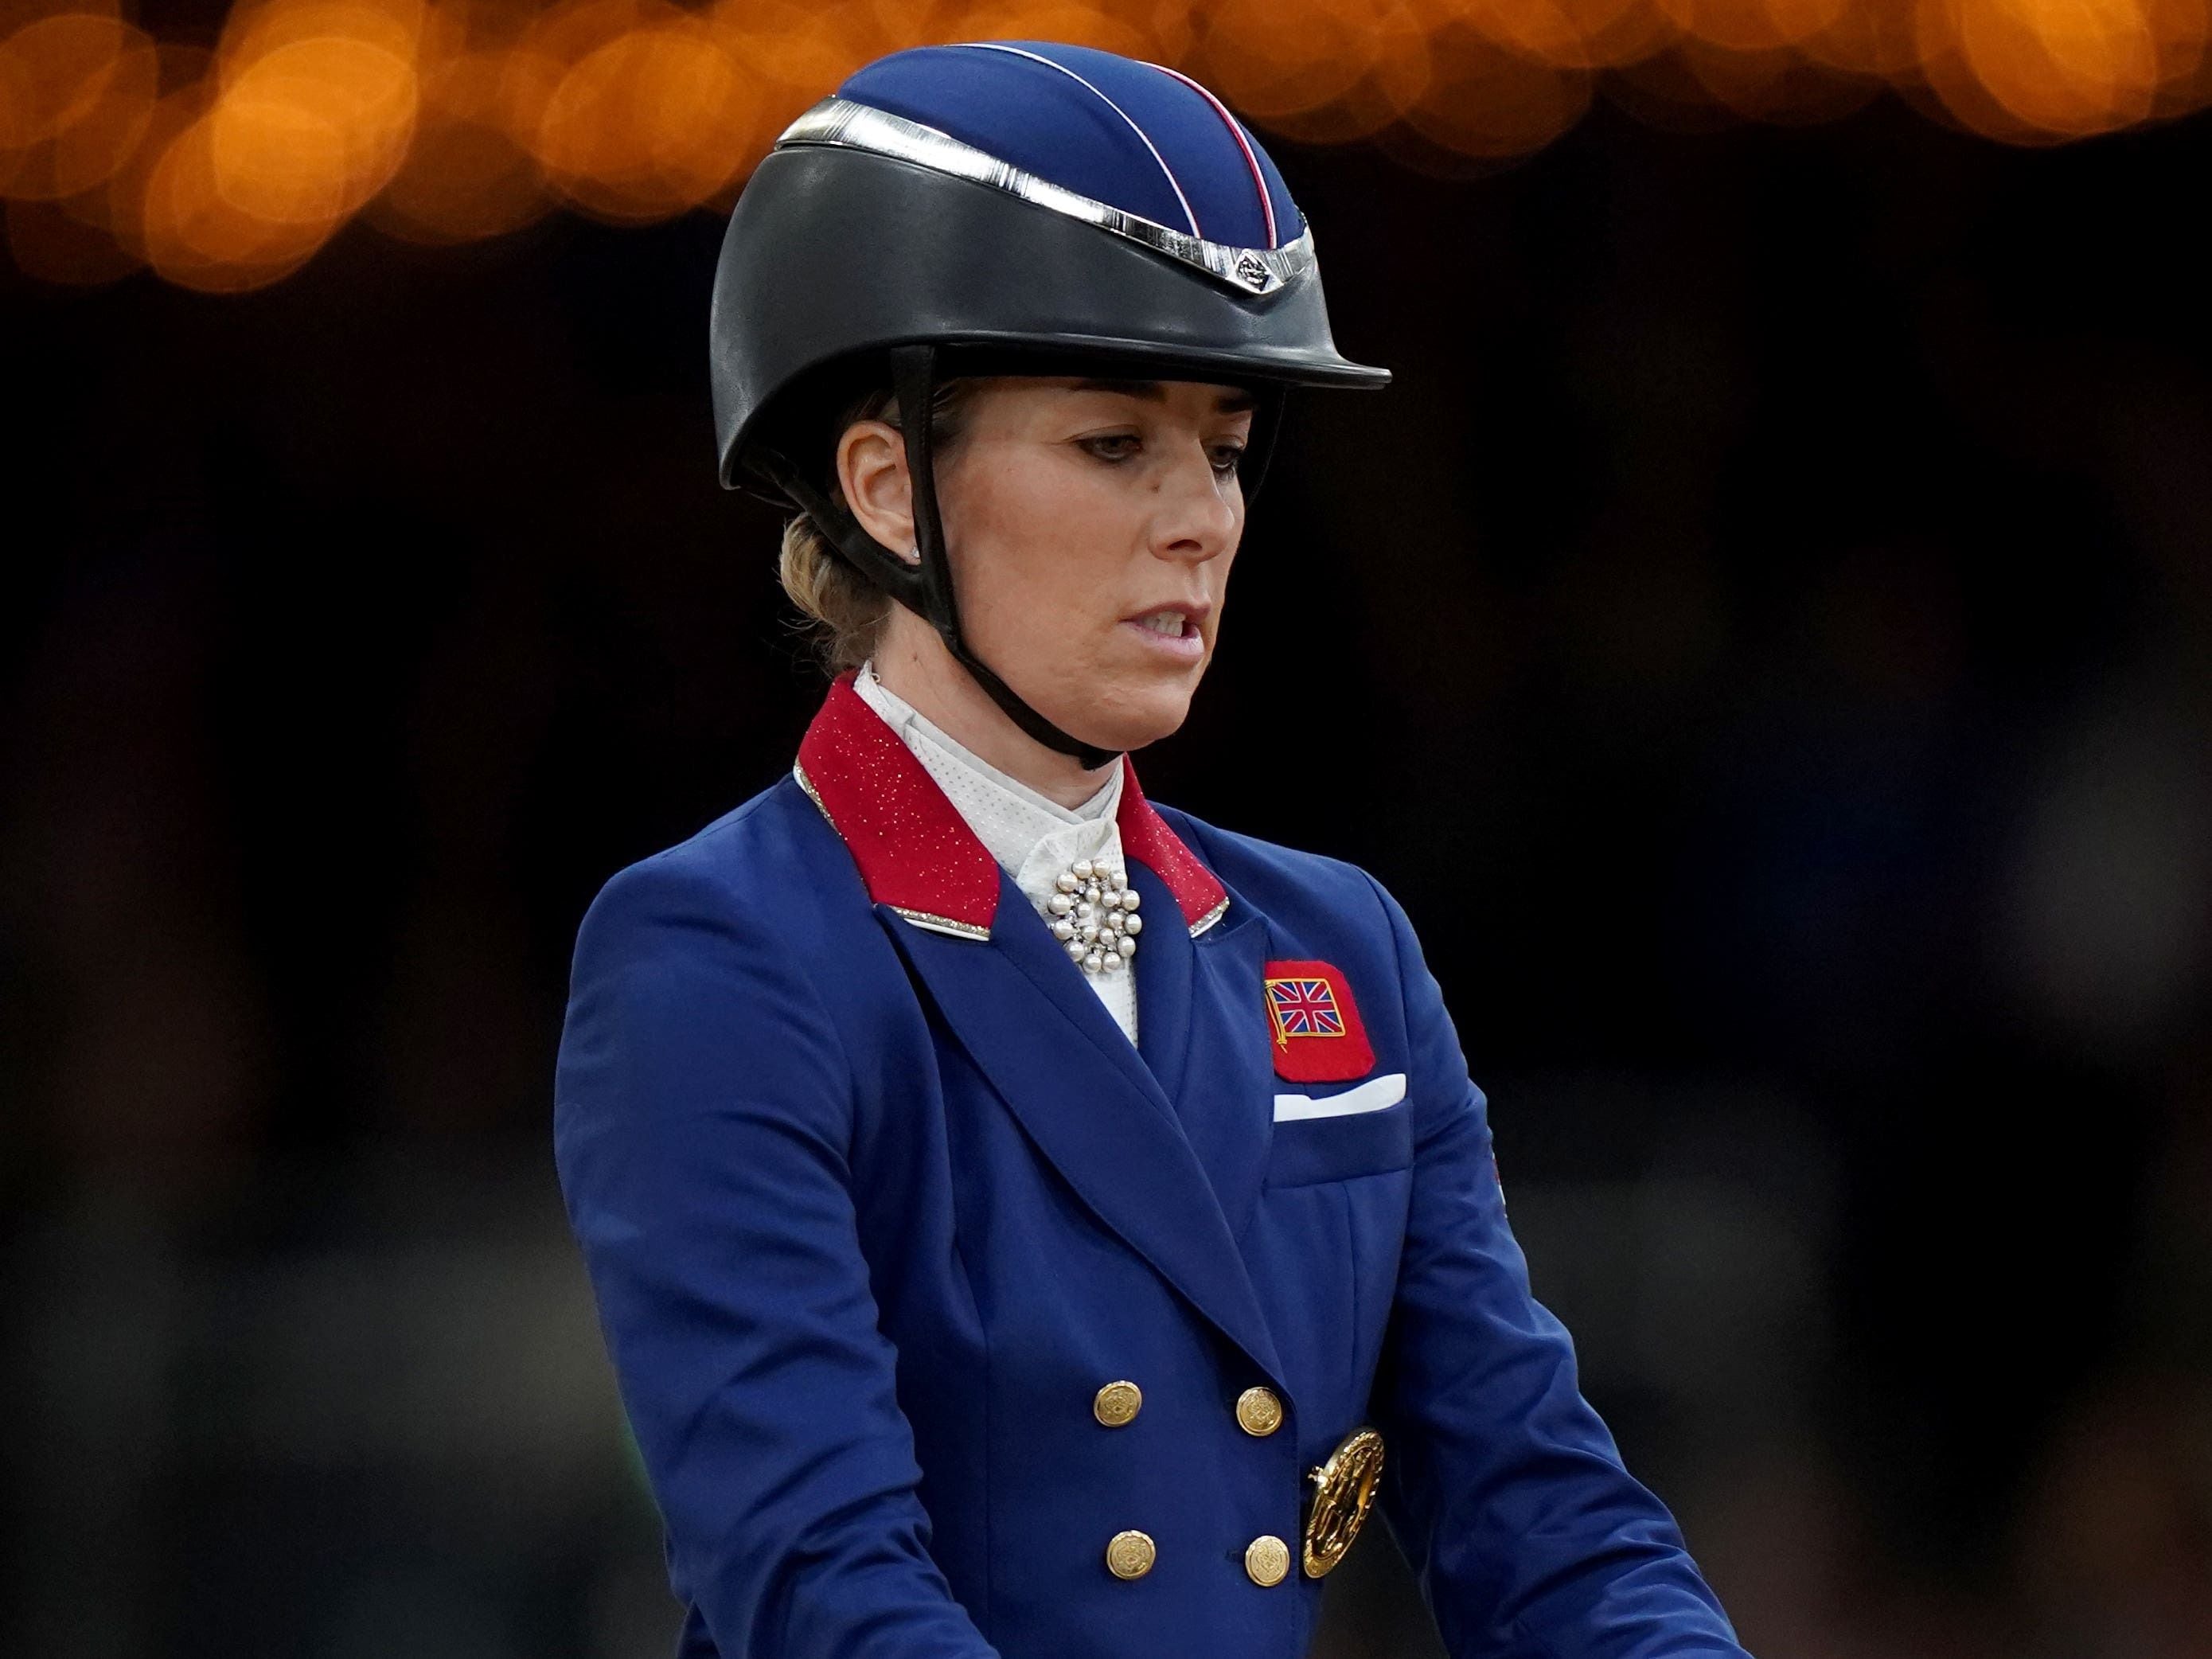 Charlotte Dujardin out of Olympics and provisionally suspended